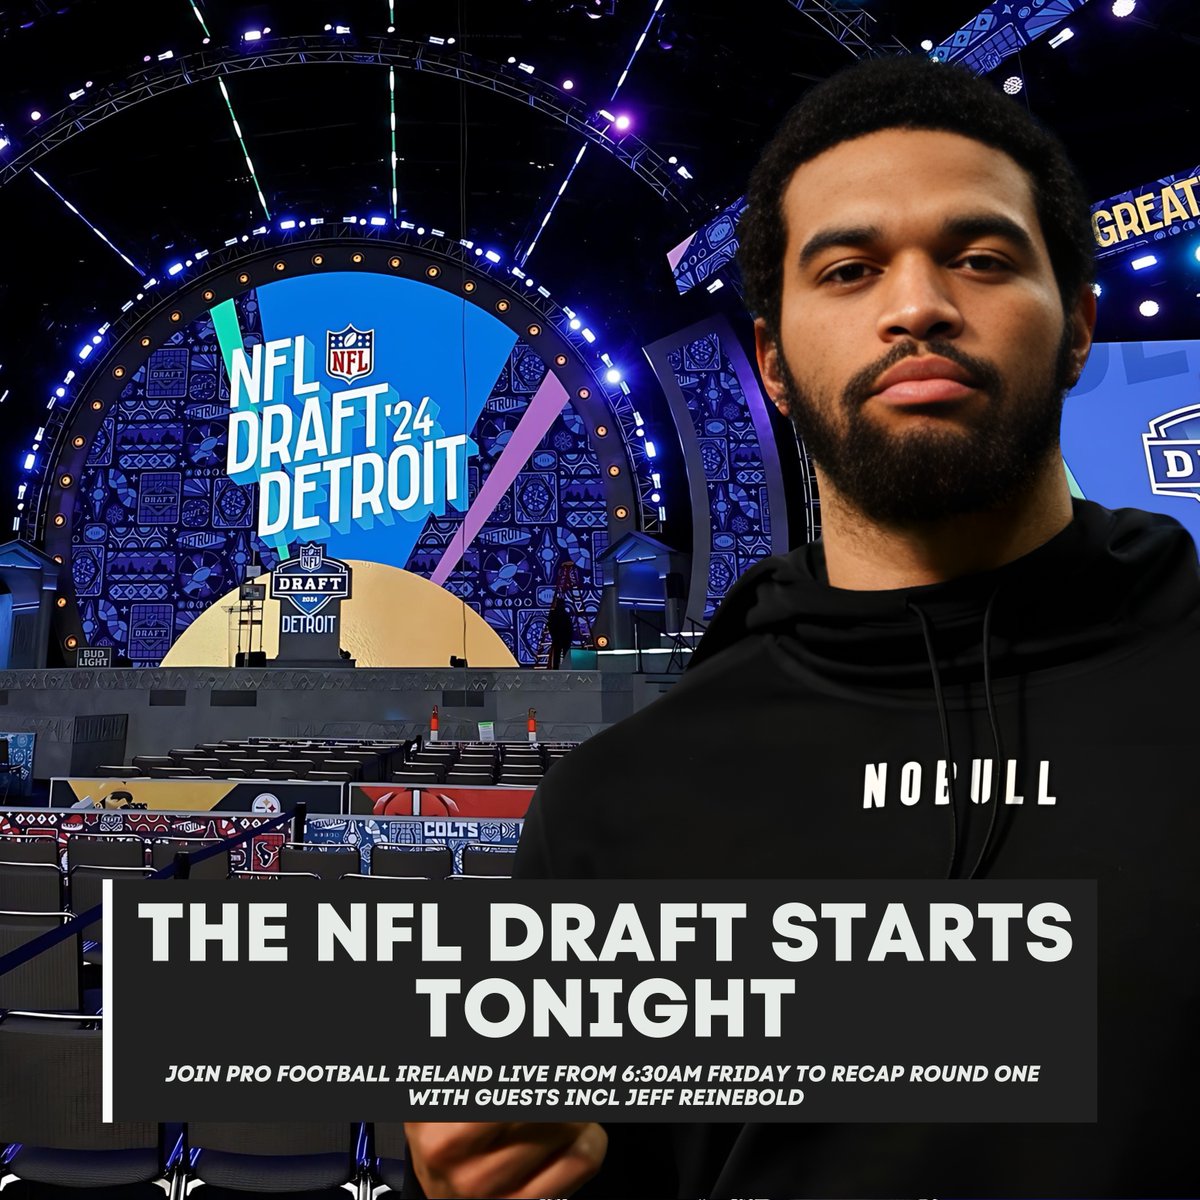 The #NFLDraft starts TONIGHT! Join us LIVE from 6:30AM on Friday as @Michael_NFL, @Jeff_Reinebold and guests recap Round 1 (with a coffee!) Live on X and on YouTube here: youtube.com/watch?v=JlulqT…